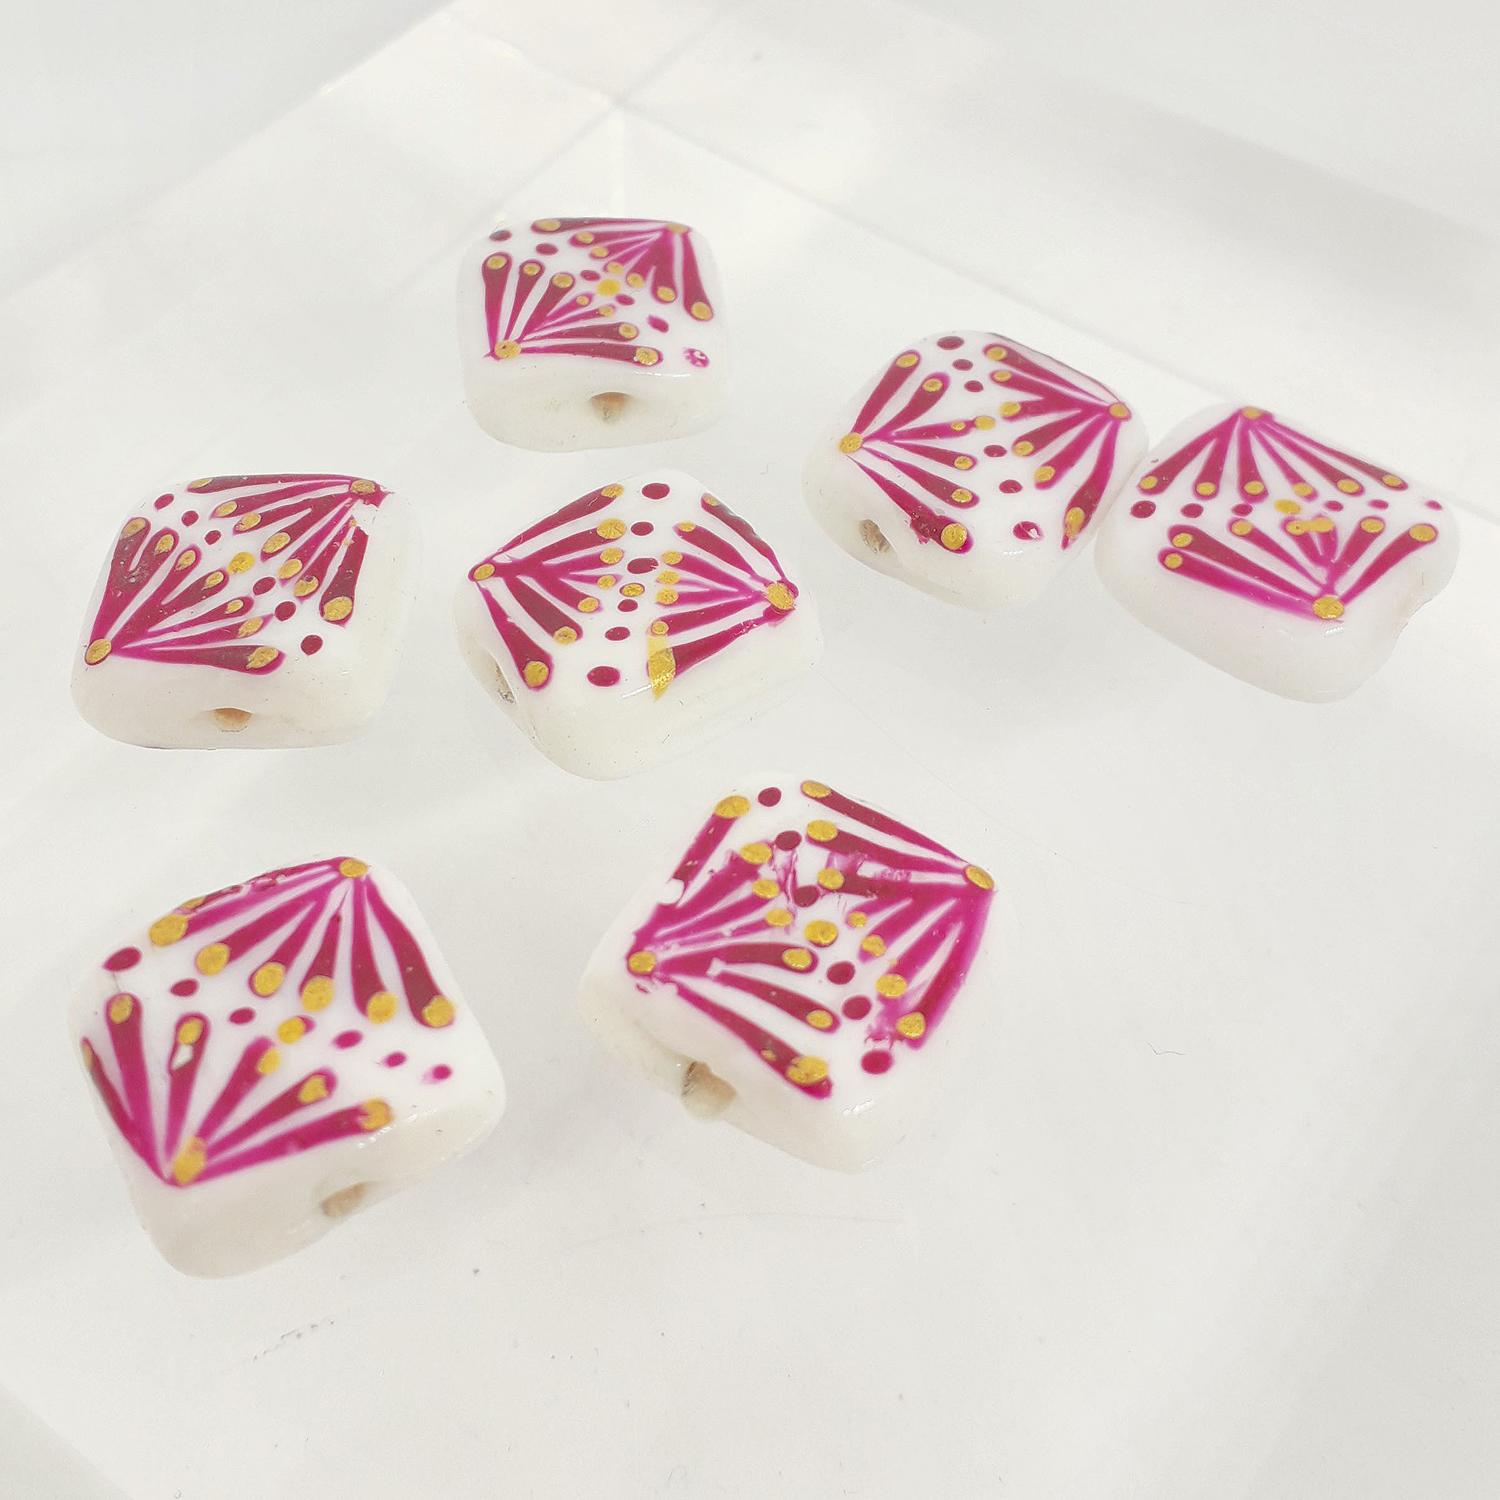 14mm White Glass Square Bead with Hand Painted Fuchsia and Gold Fan Design